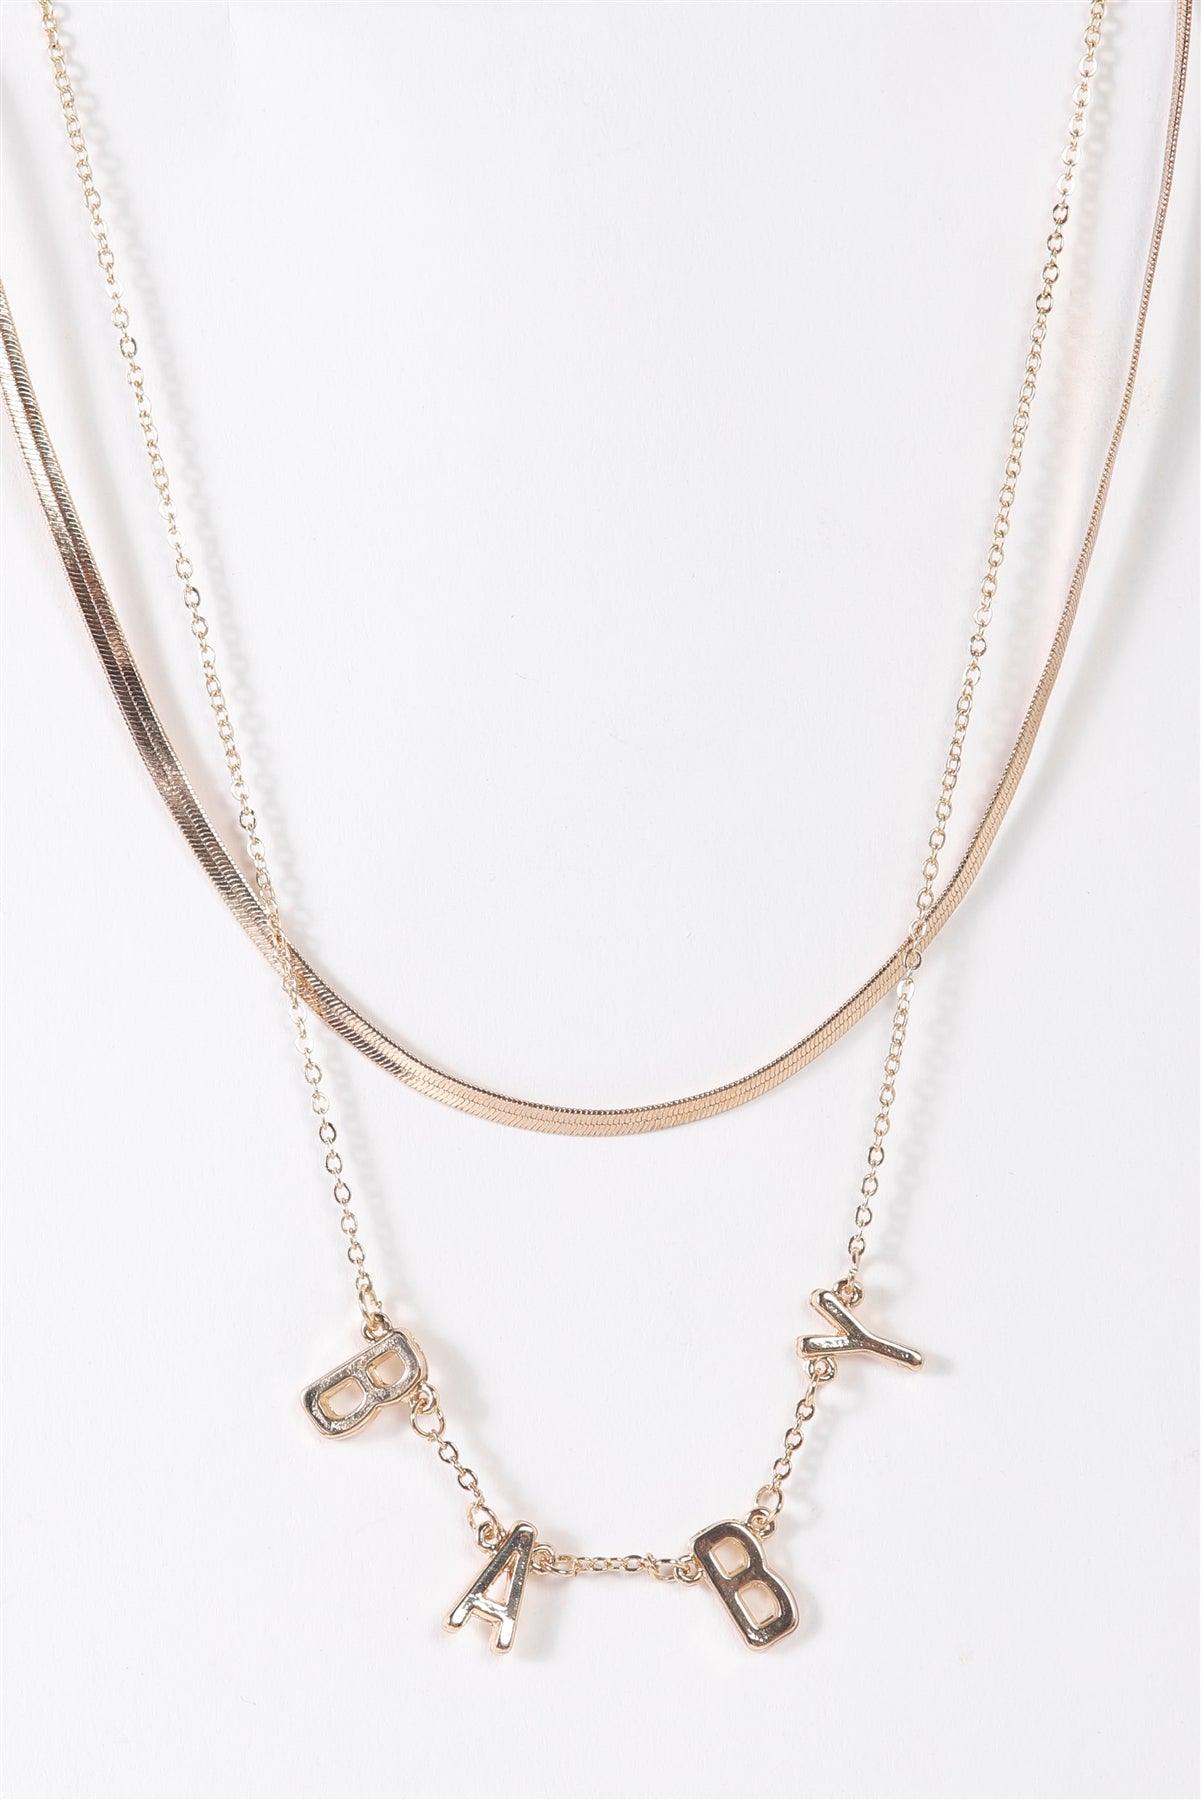 Gold Double Flat Snake Chain & Linked With "Baby" Letters Necklace /3 Pieces